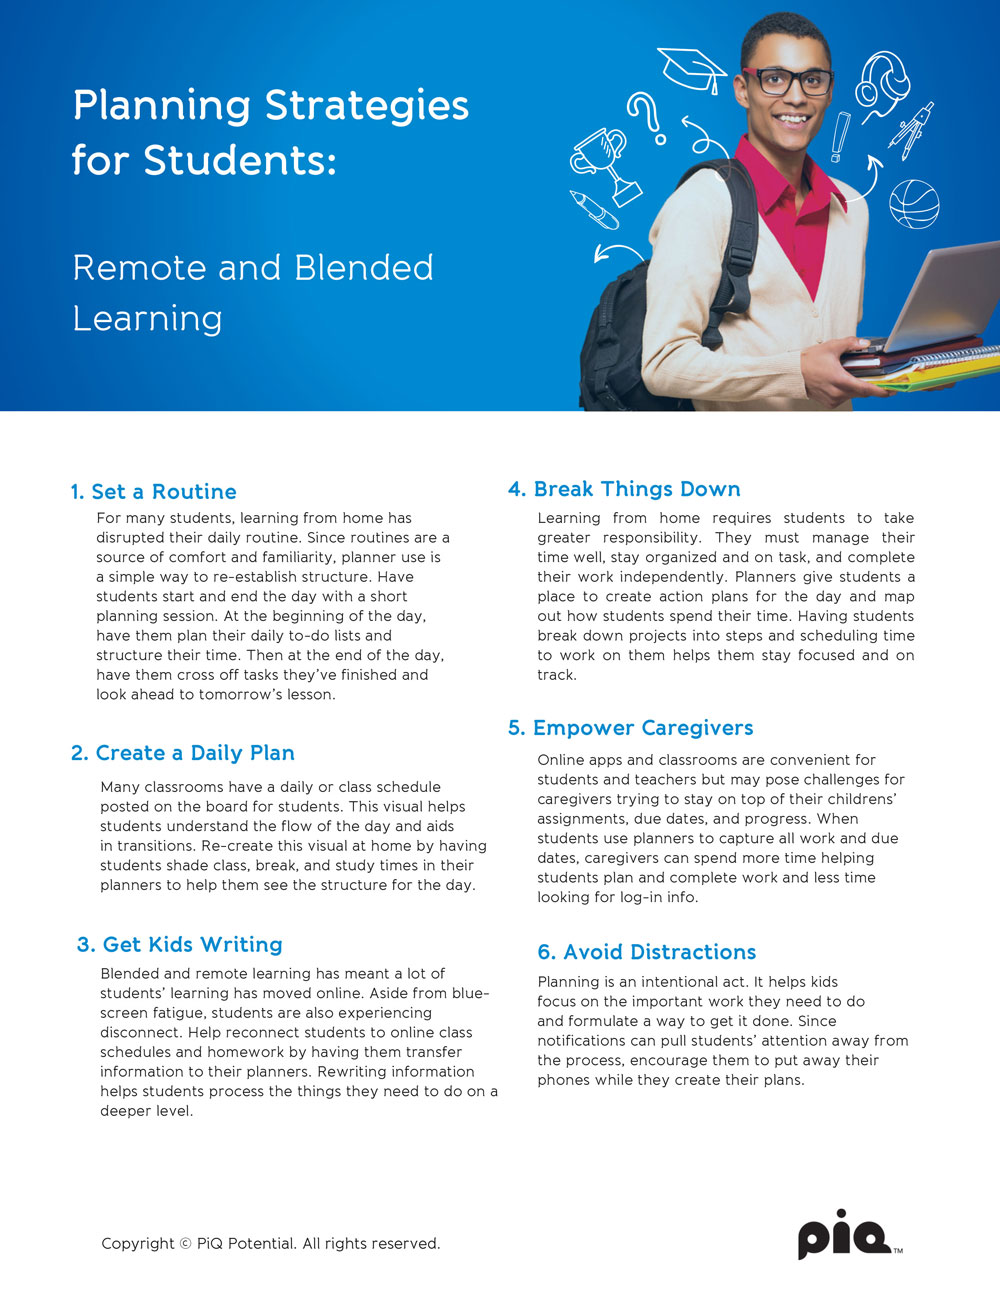 Planning Strategies for Students: Remote & Blended Learning